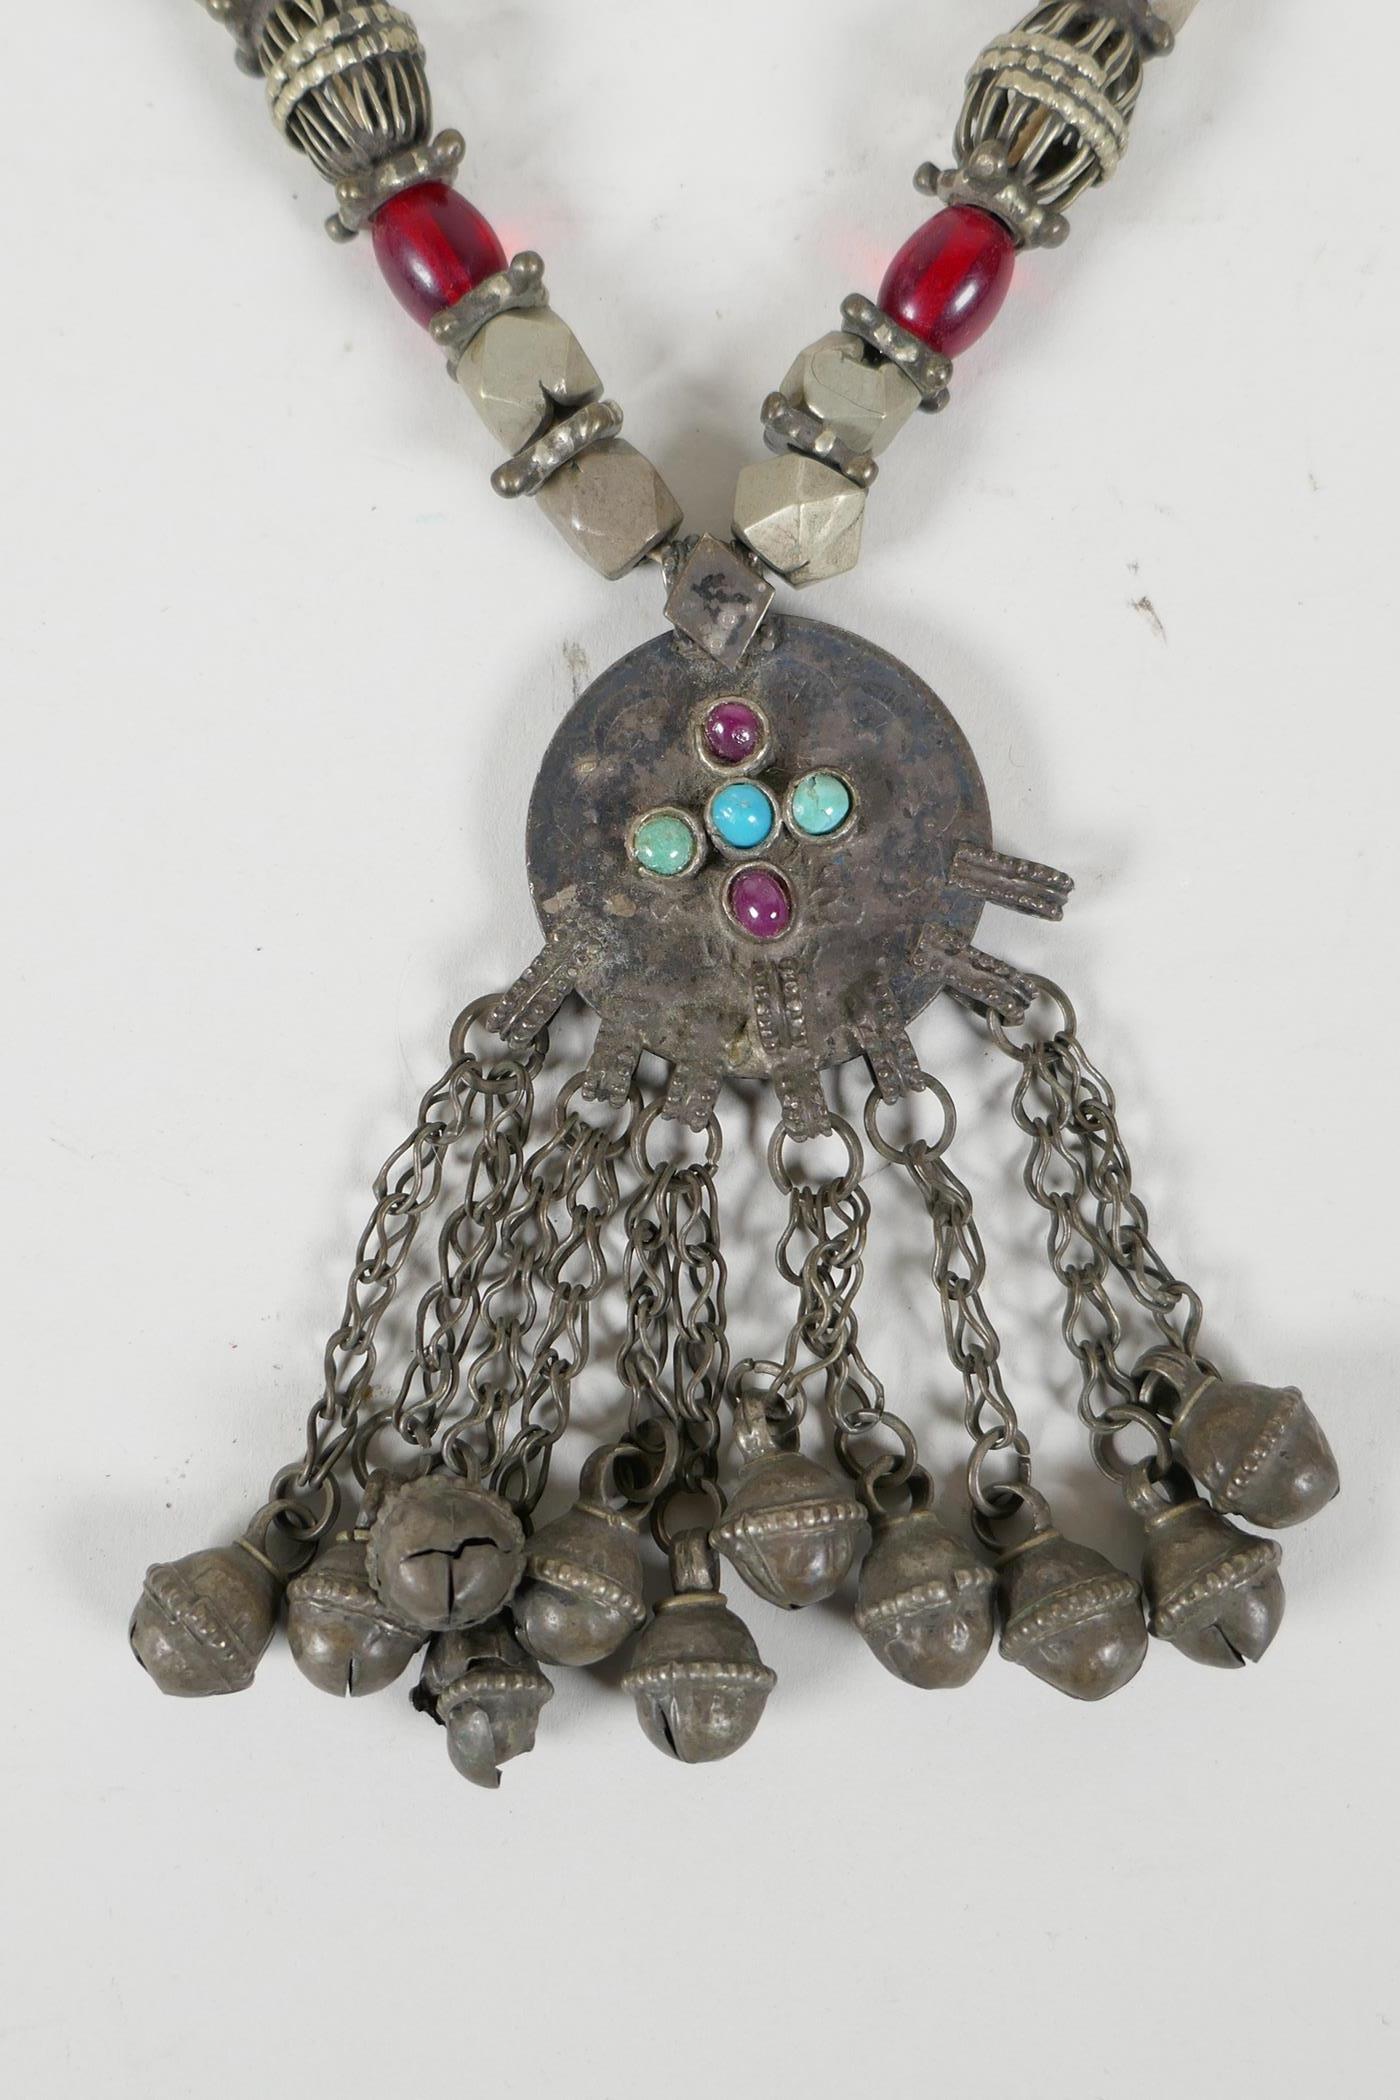 A Turkmen white metal & bead necklace with an Ottoman coin feature pendant, set with stones & bells, - Image 2 of 4